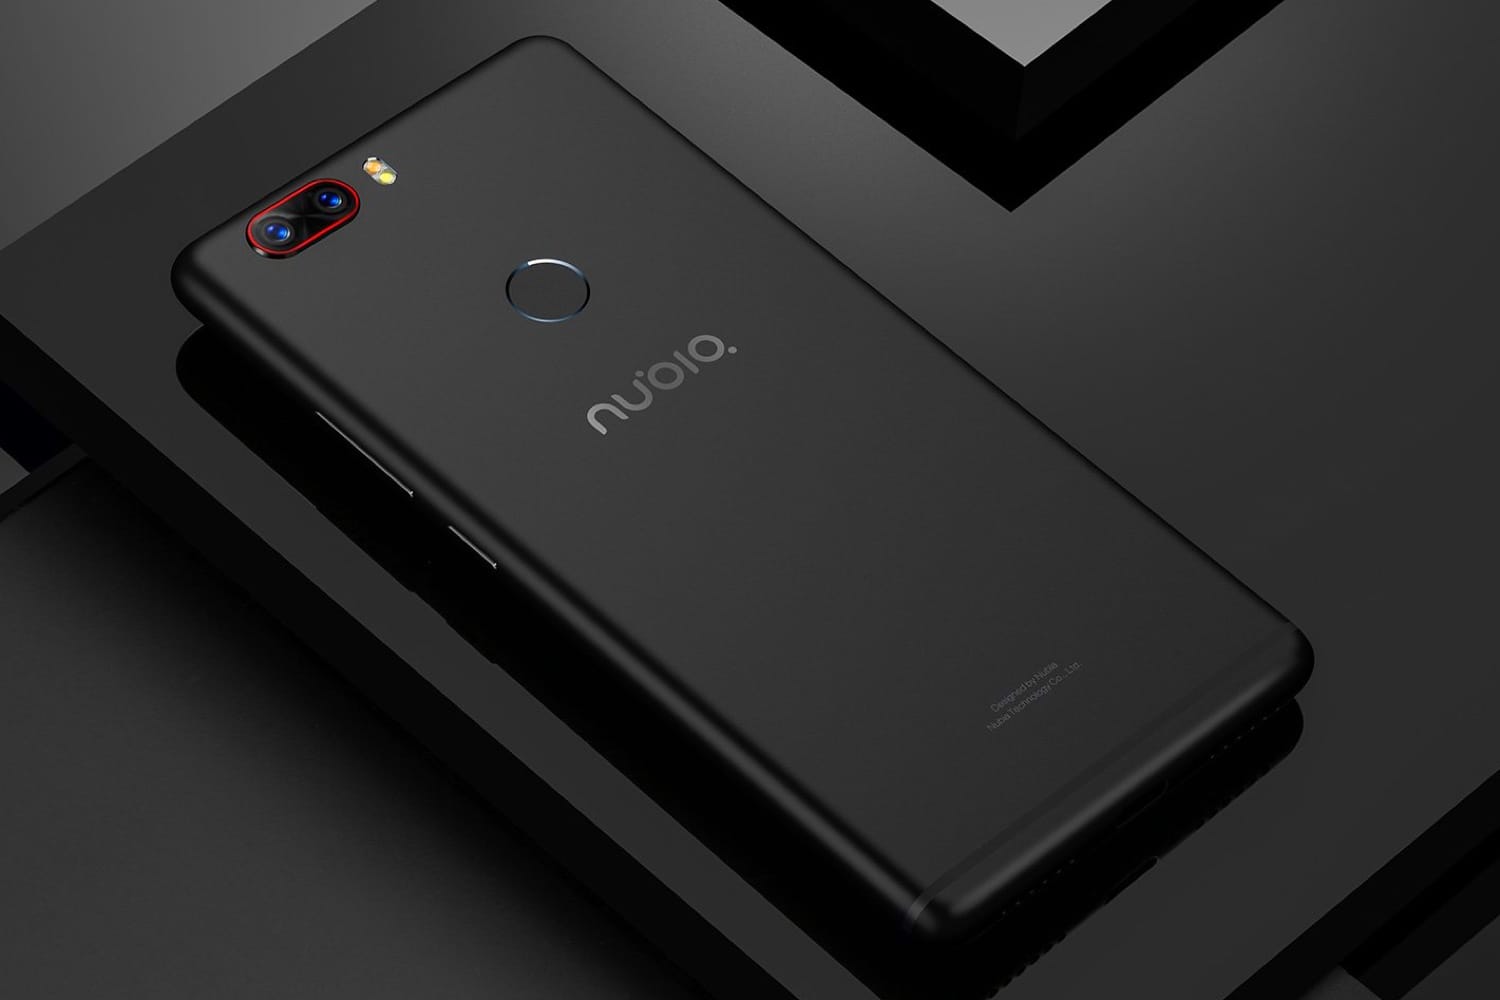 Bezramochnыy Nubia Z19 of Android Oreo - the most powerful smartphone in the world for the first time in images